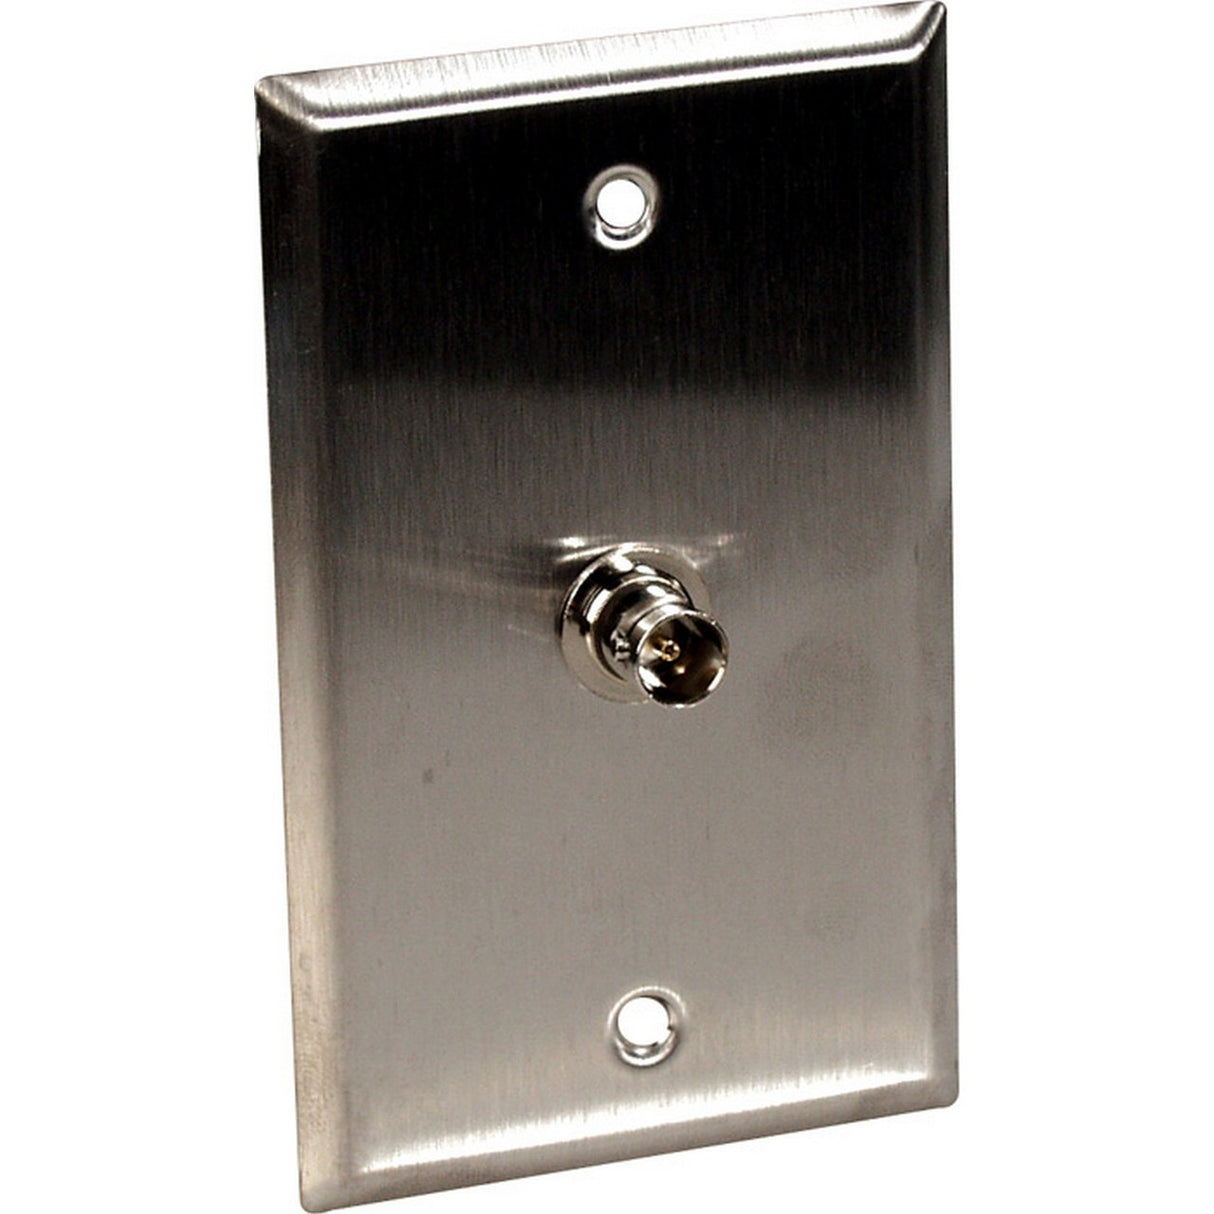 TecNec WPL-1101 | Single BNCF Barrel 1 Gang Wall Plate Stainless Steel